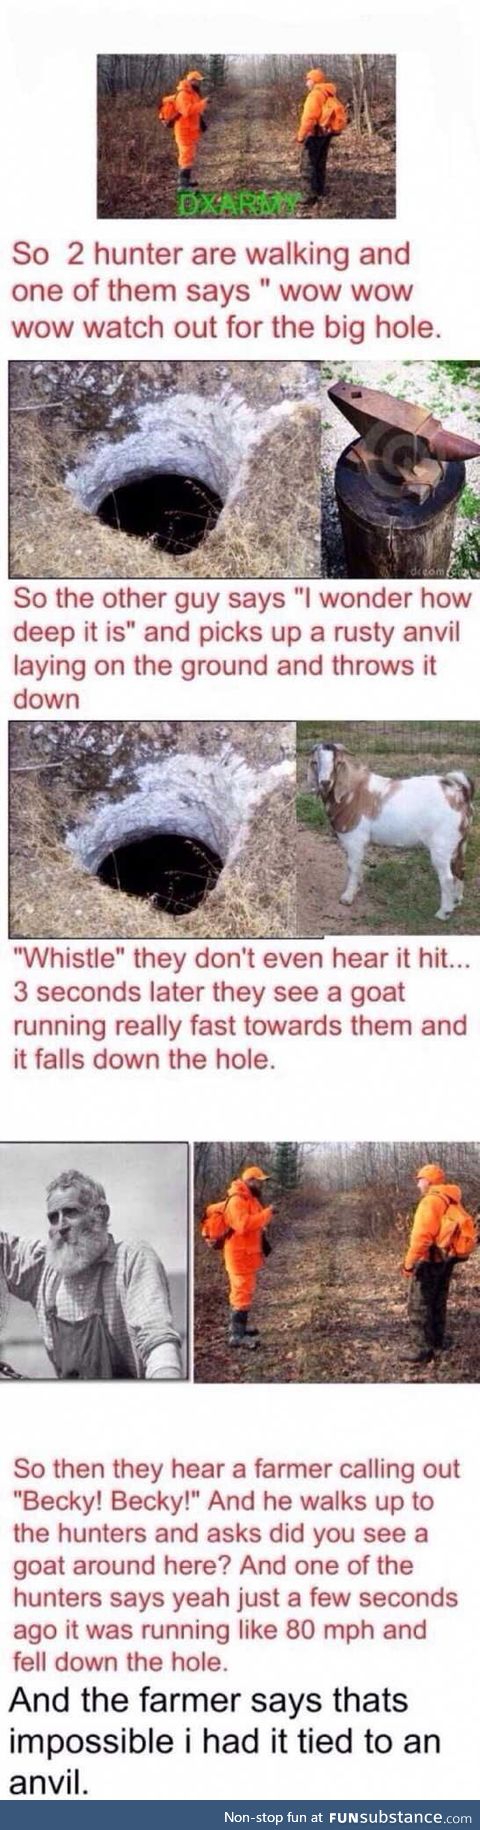 Such a GOAT story